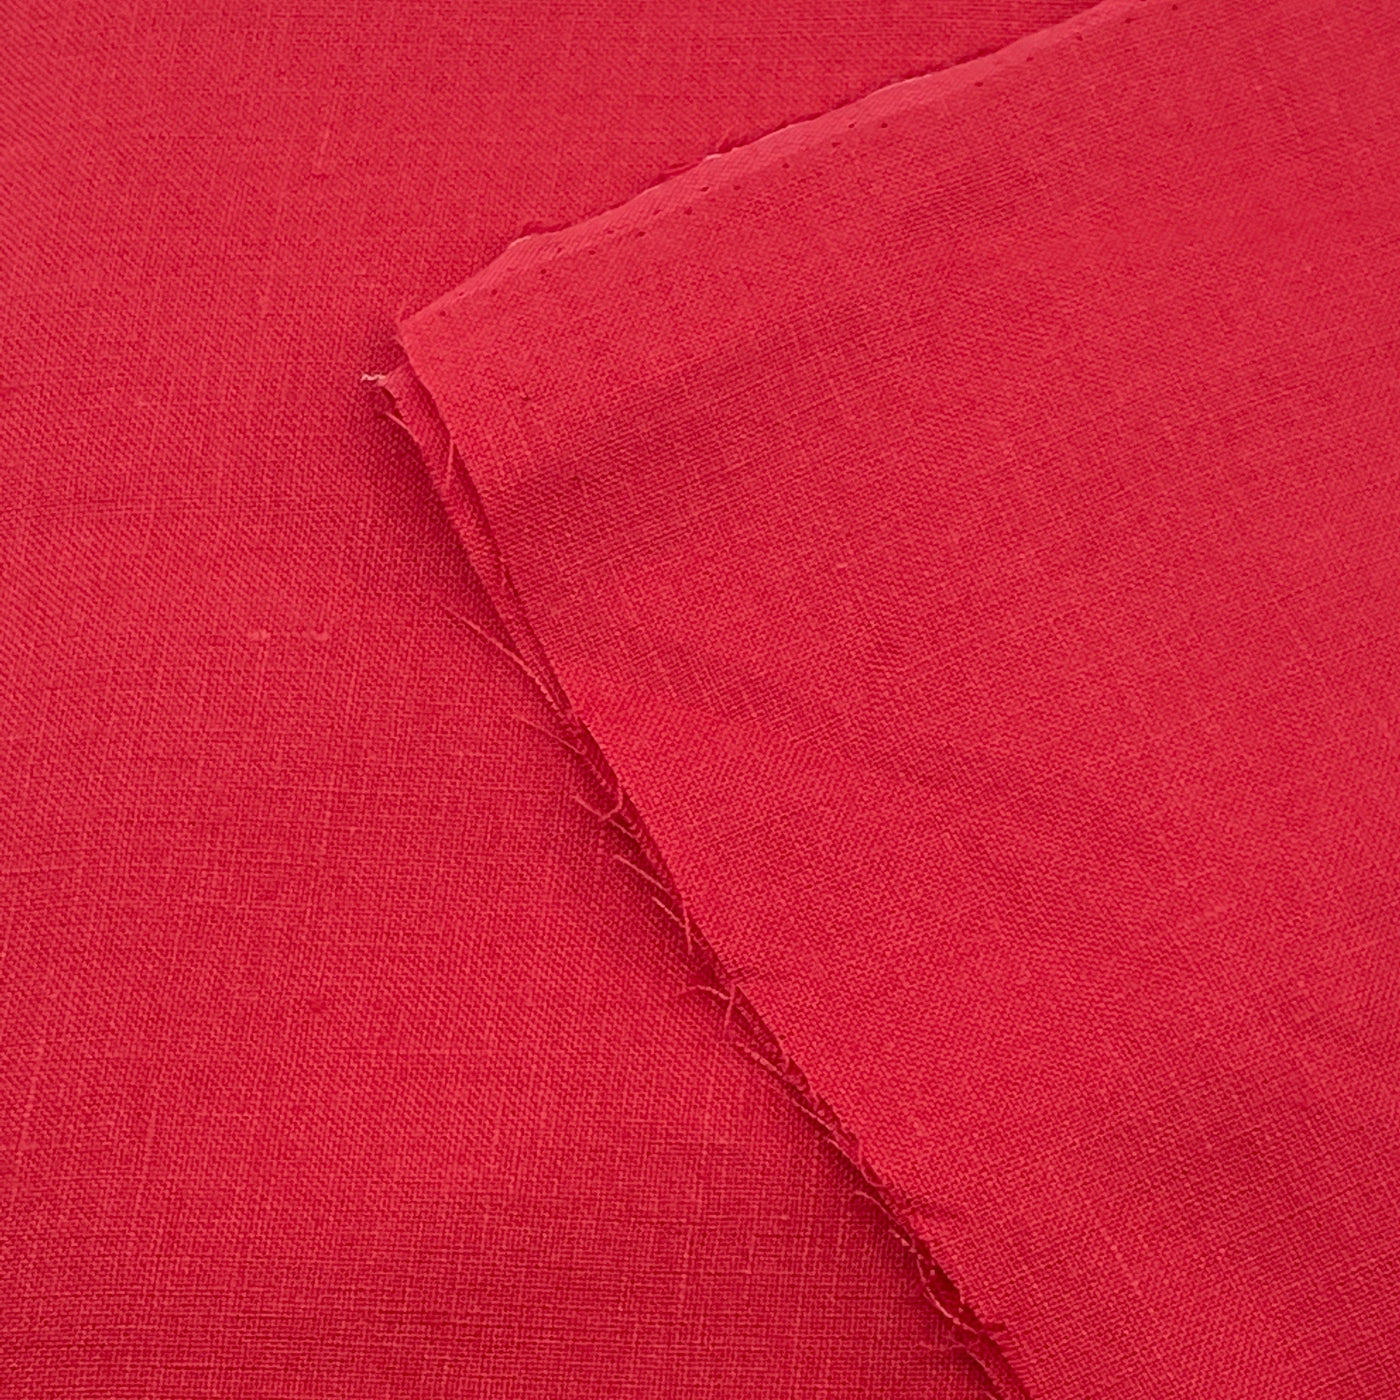 Driftwood Linen in Red